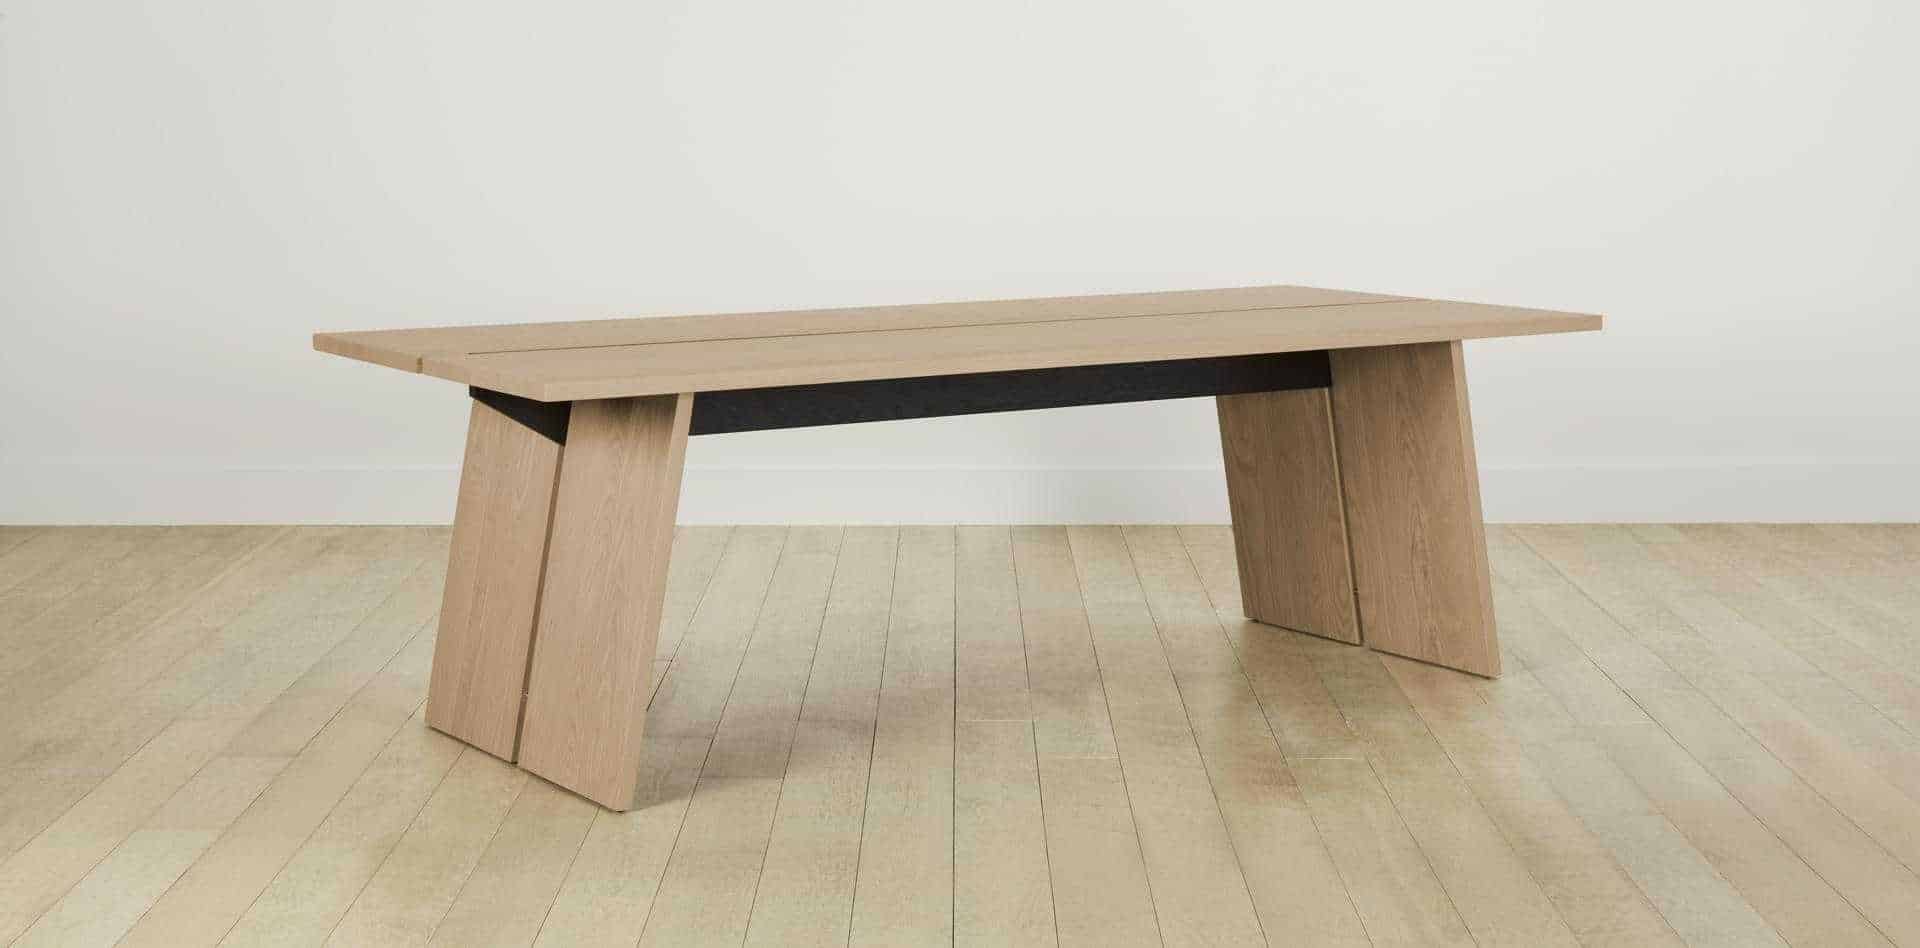 The Carlisle Dining Table